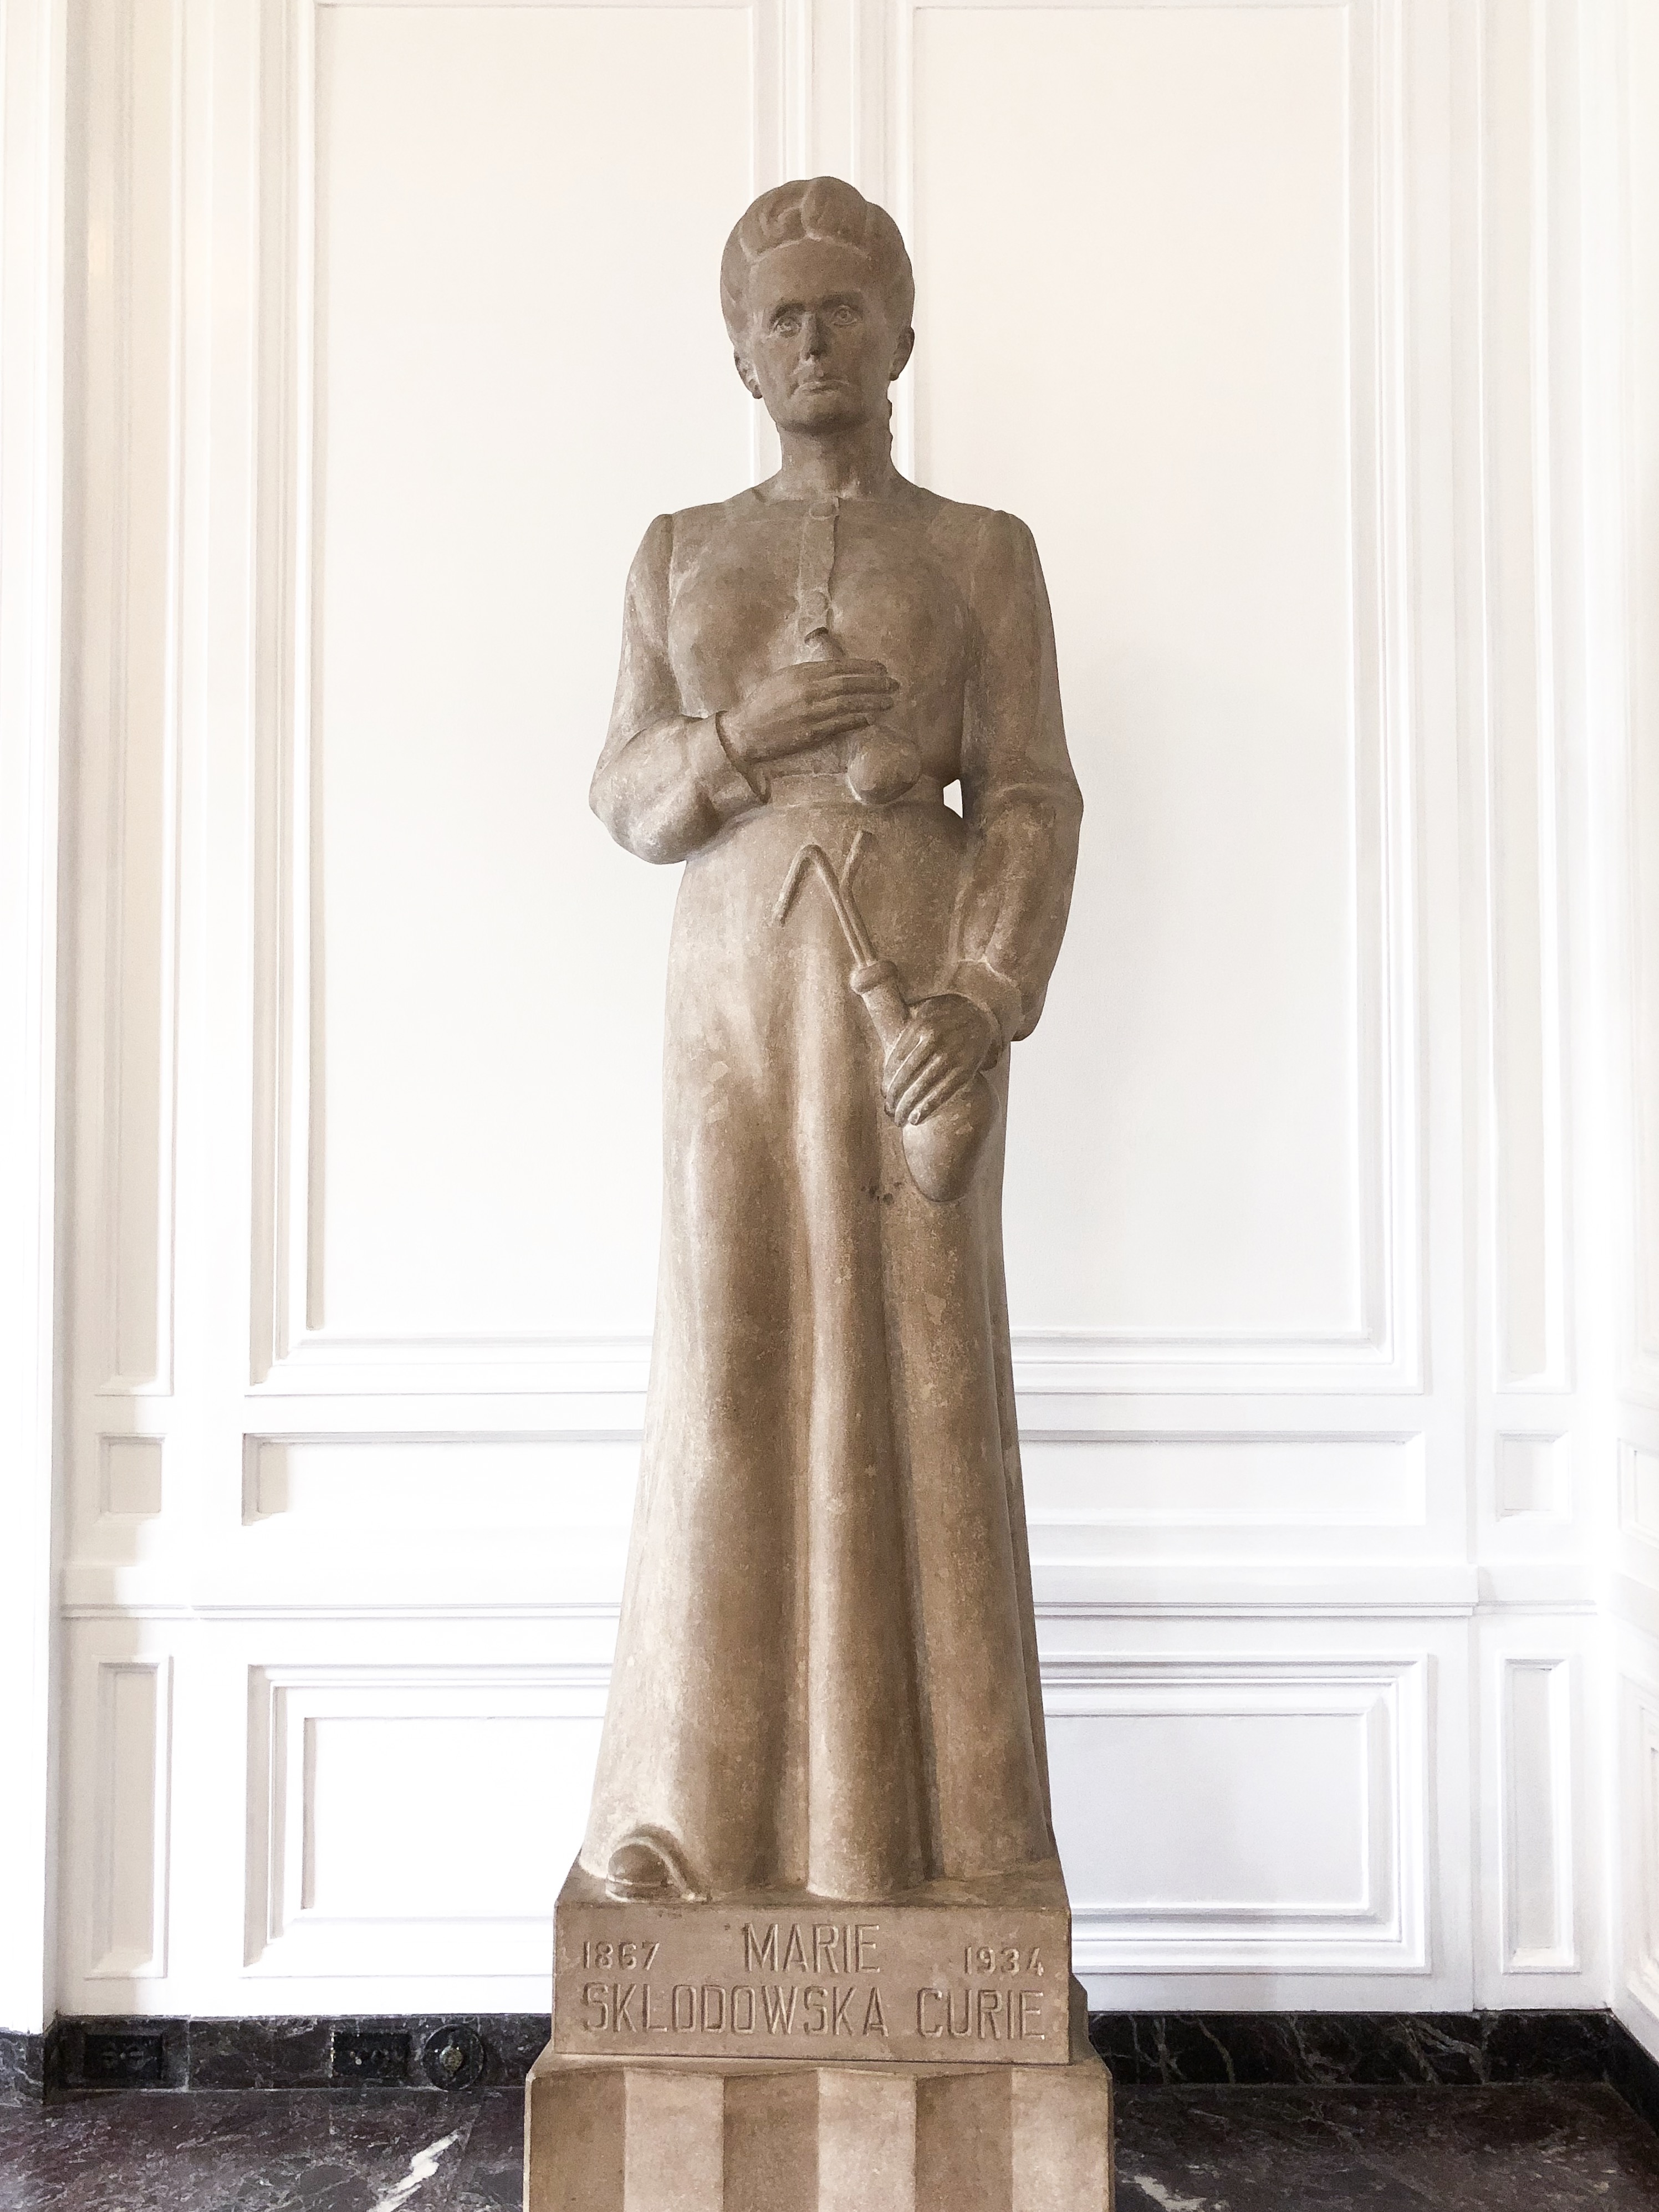 Statue of Marie Skladowska-Curie in the Hall of Immortals
